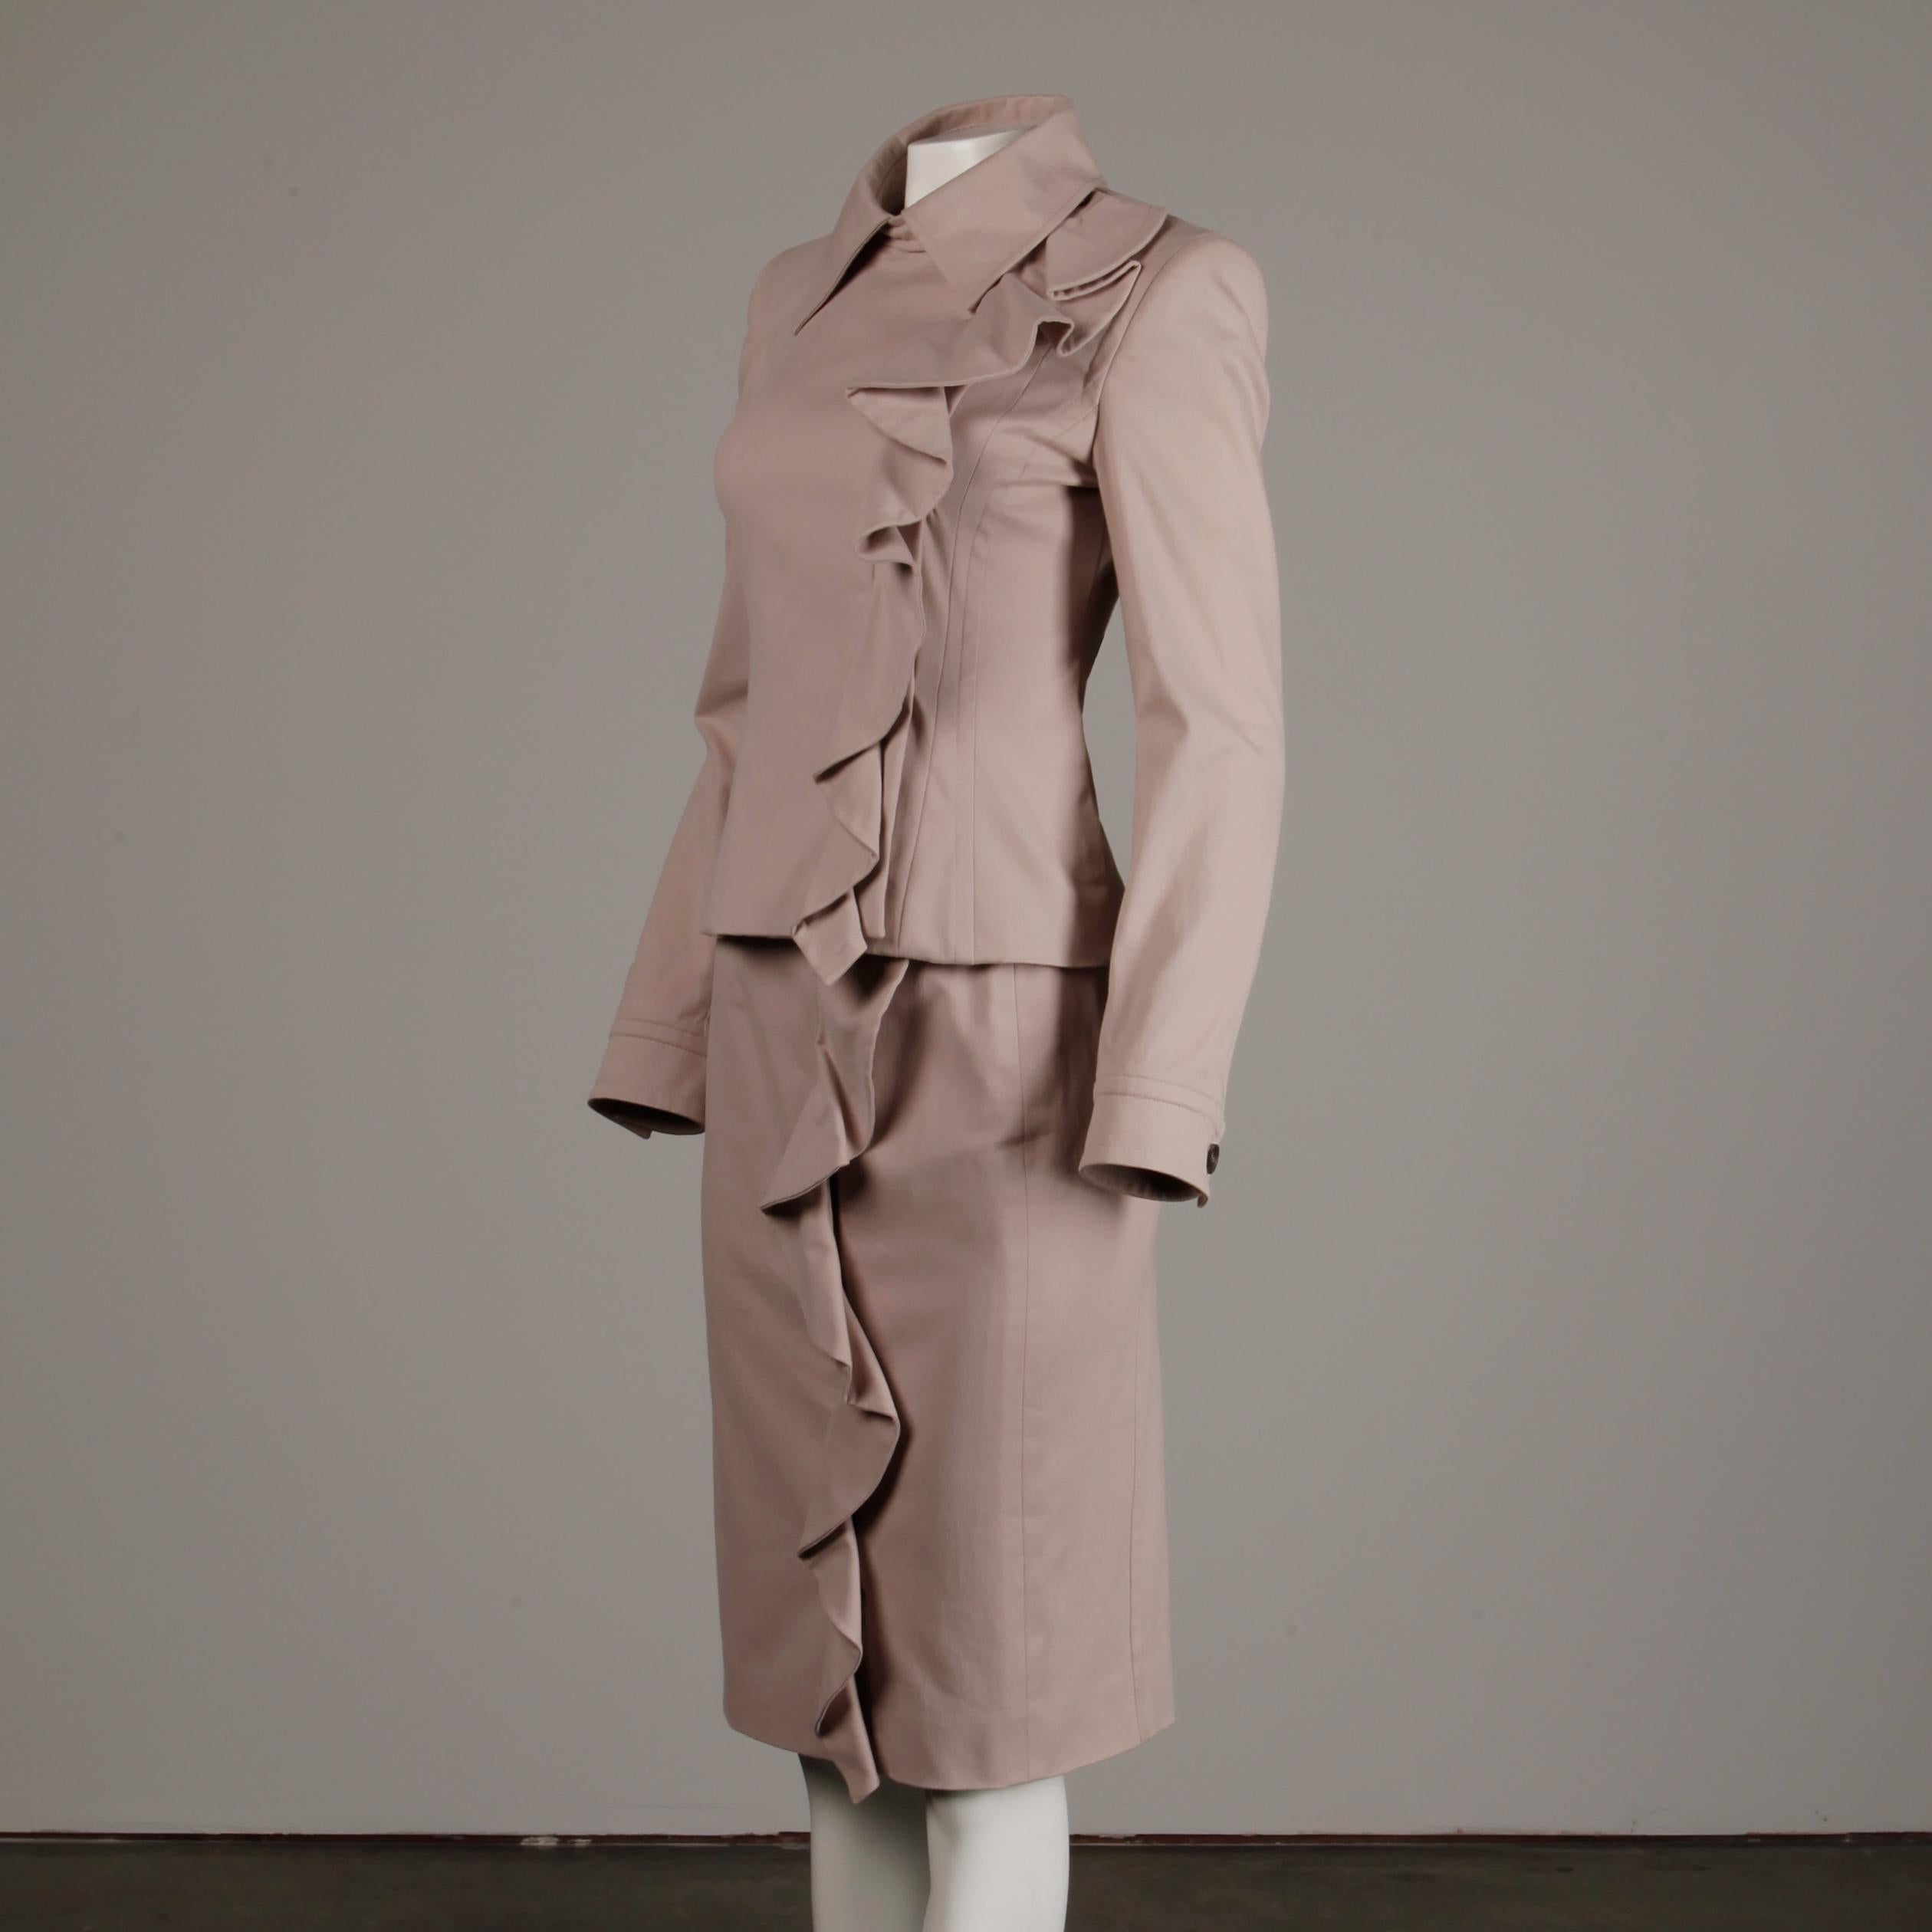 2003 Yves Saint Laurent by Tom Ford Pink Ruffle Jacket + Skirt Suit Ensemble YSL For Sale 1